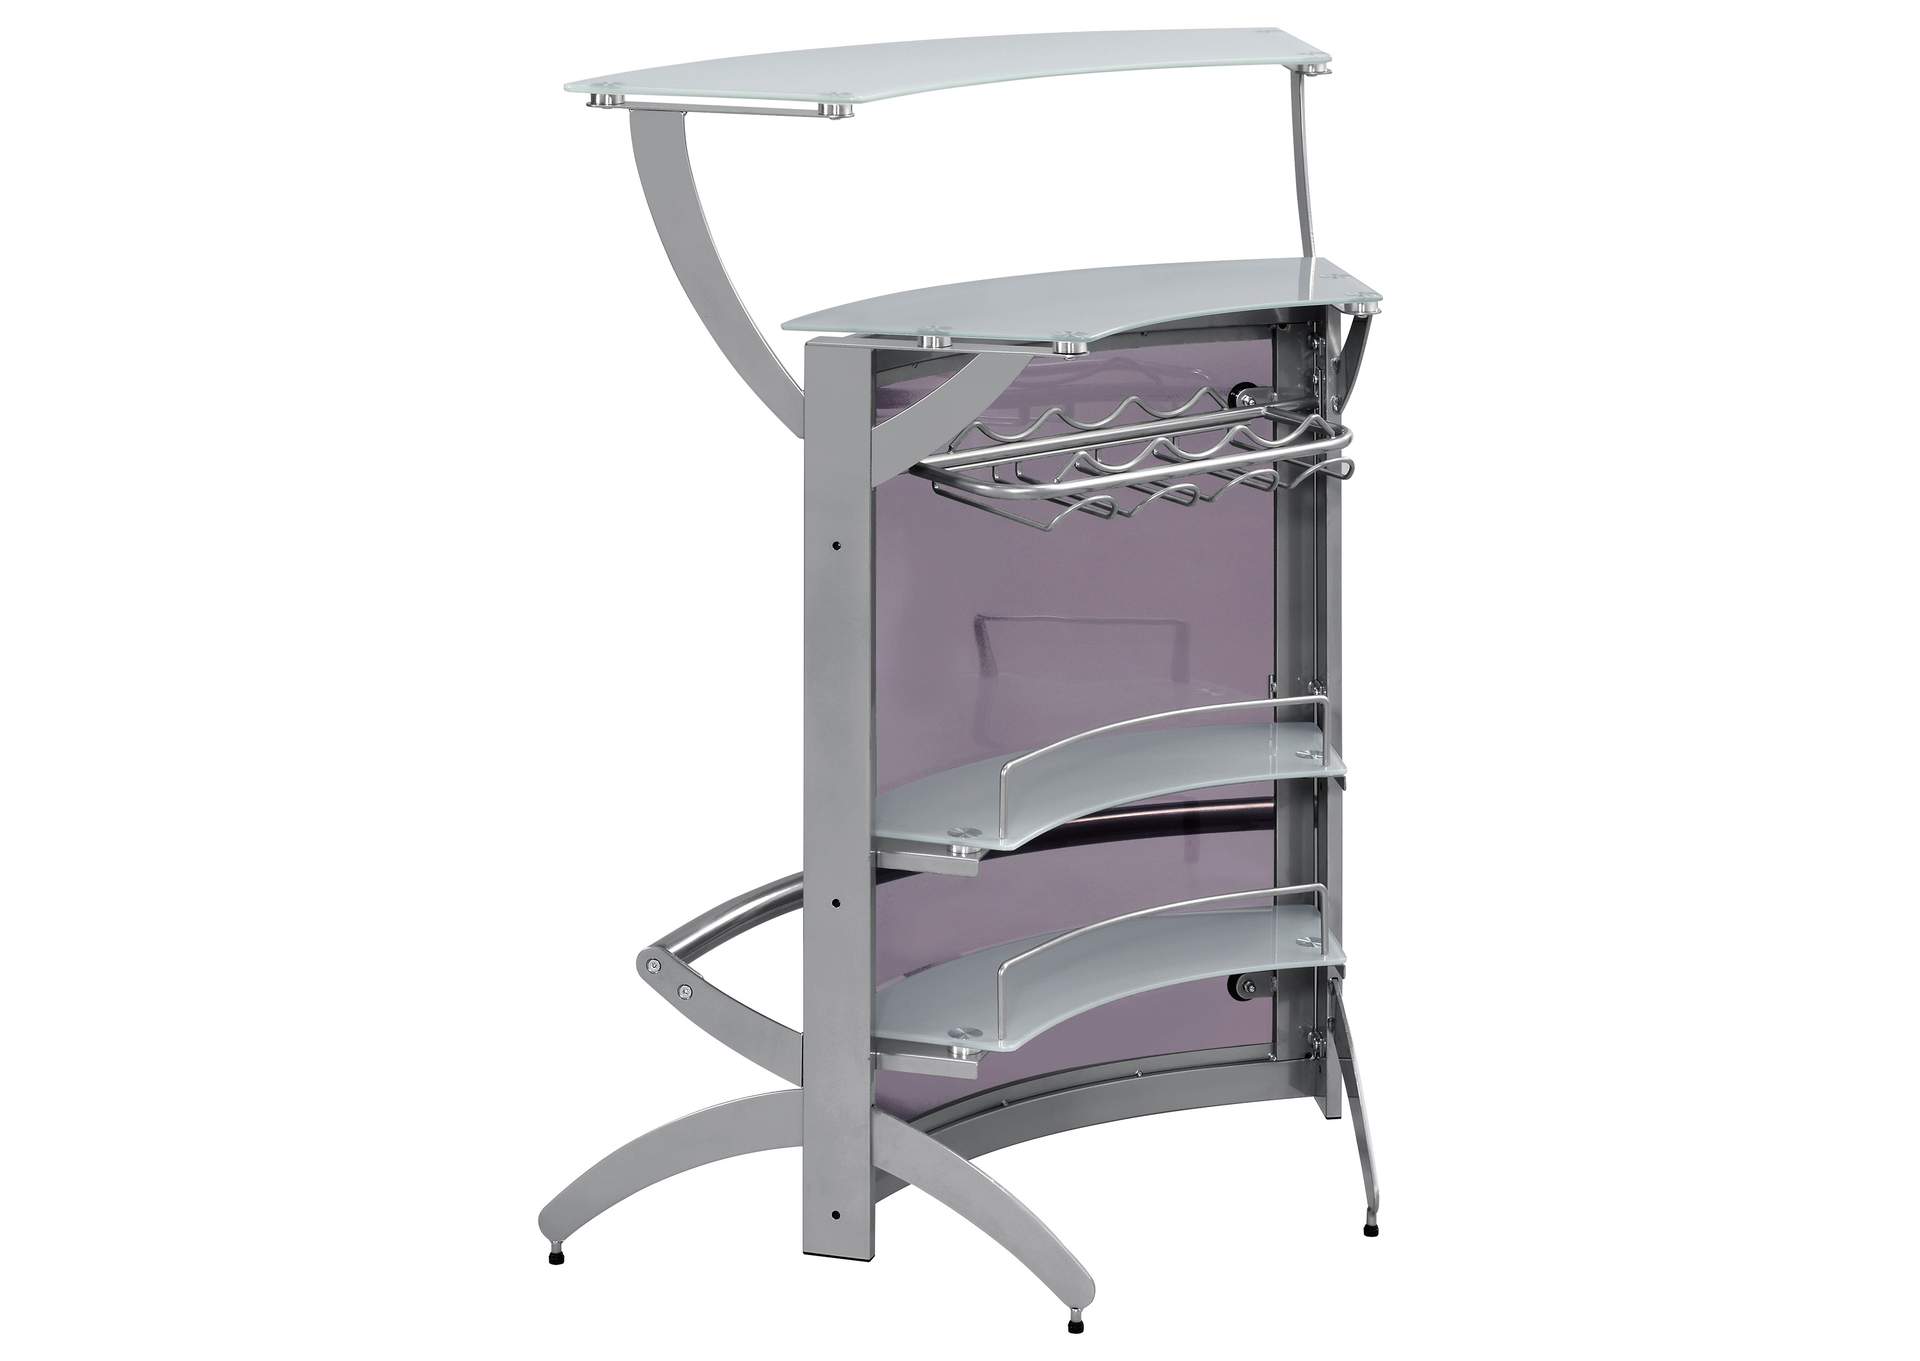 Dallas 2-shelf Bar Unit Silver and Frosted Glass,Coaster Furniture